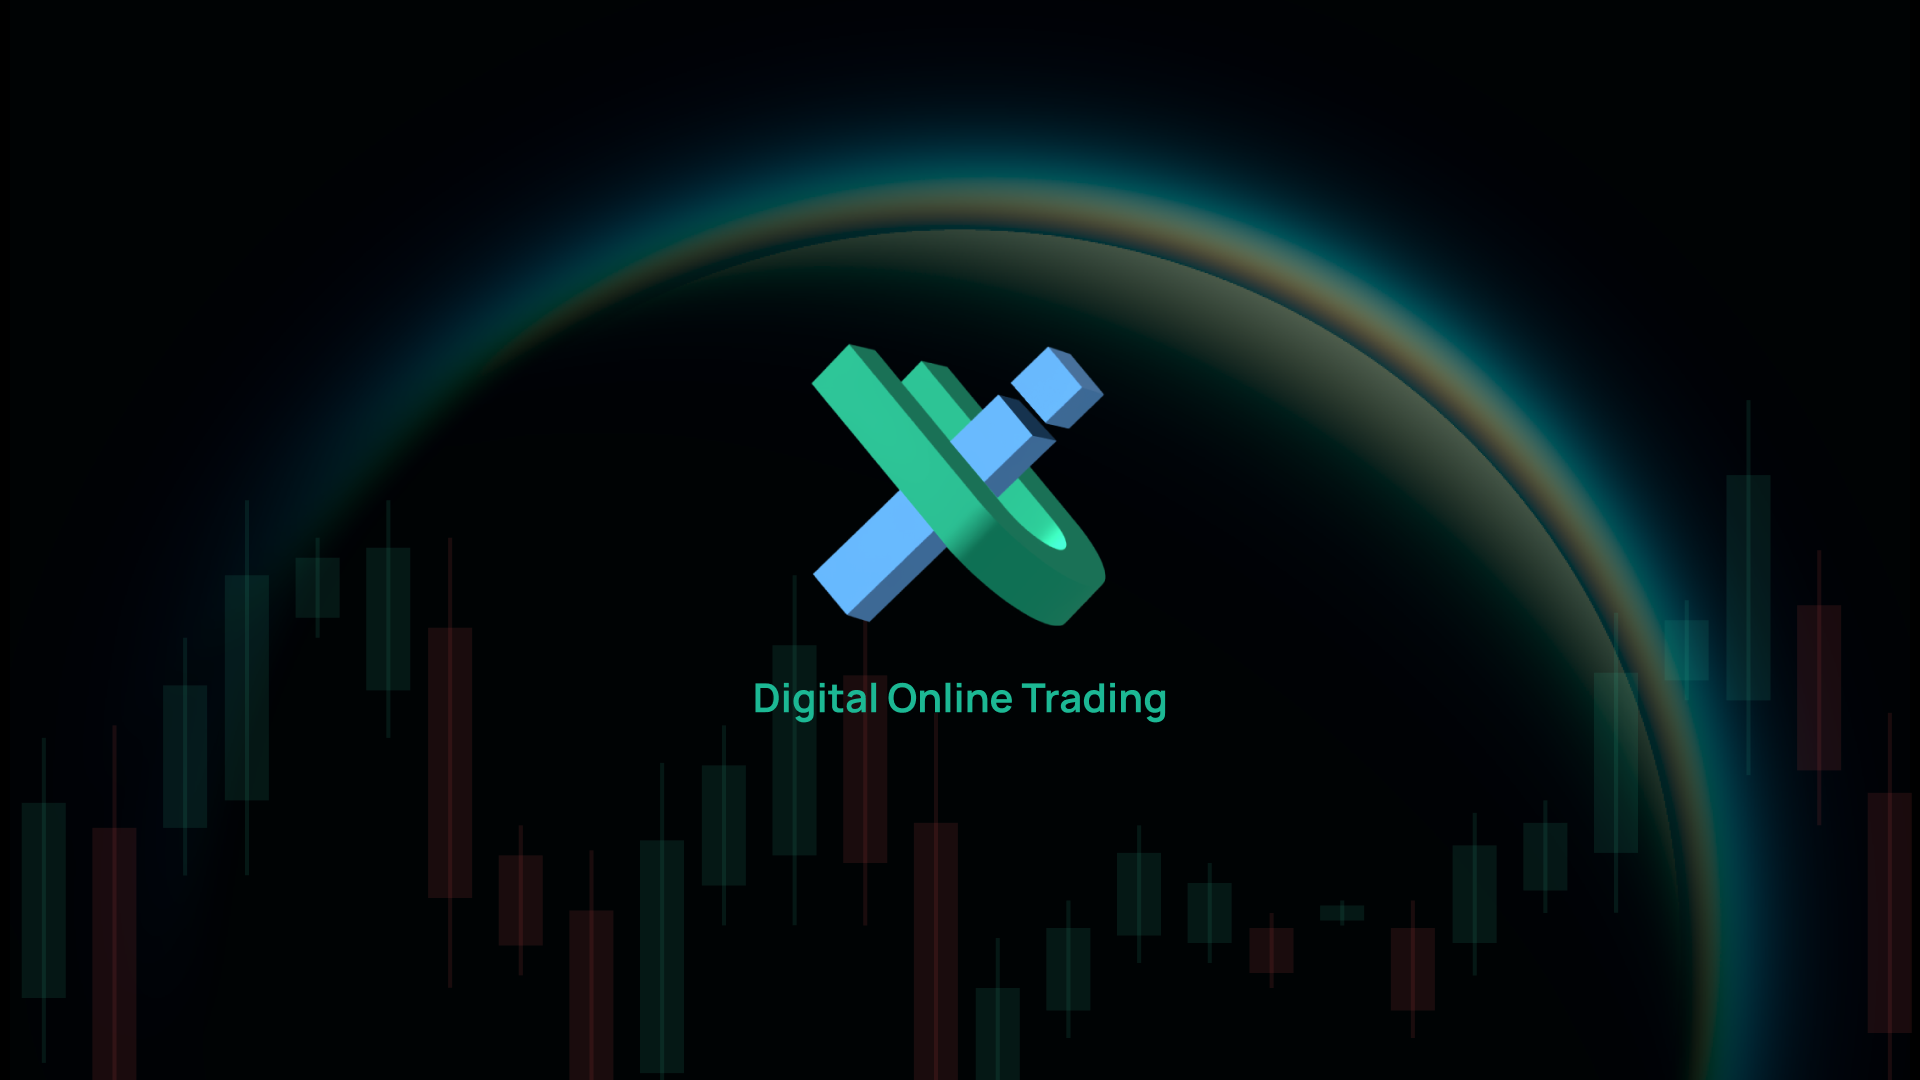 Ready go to ... https://iuxmarket.com/?code=Uo3K93Yl [ IUX | Your Trusted Online Trading Platform]